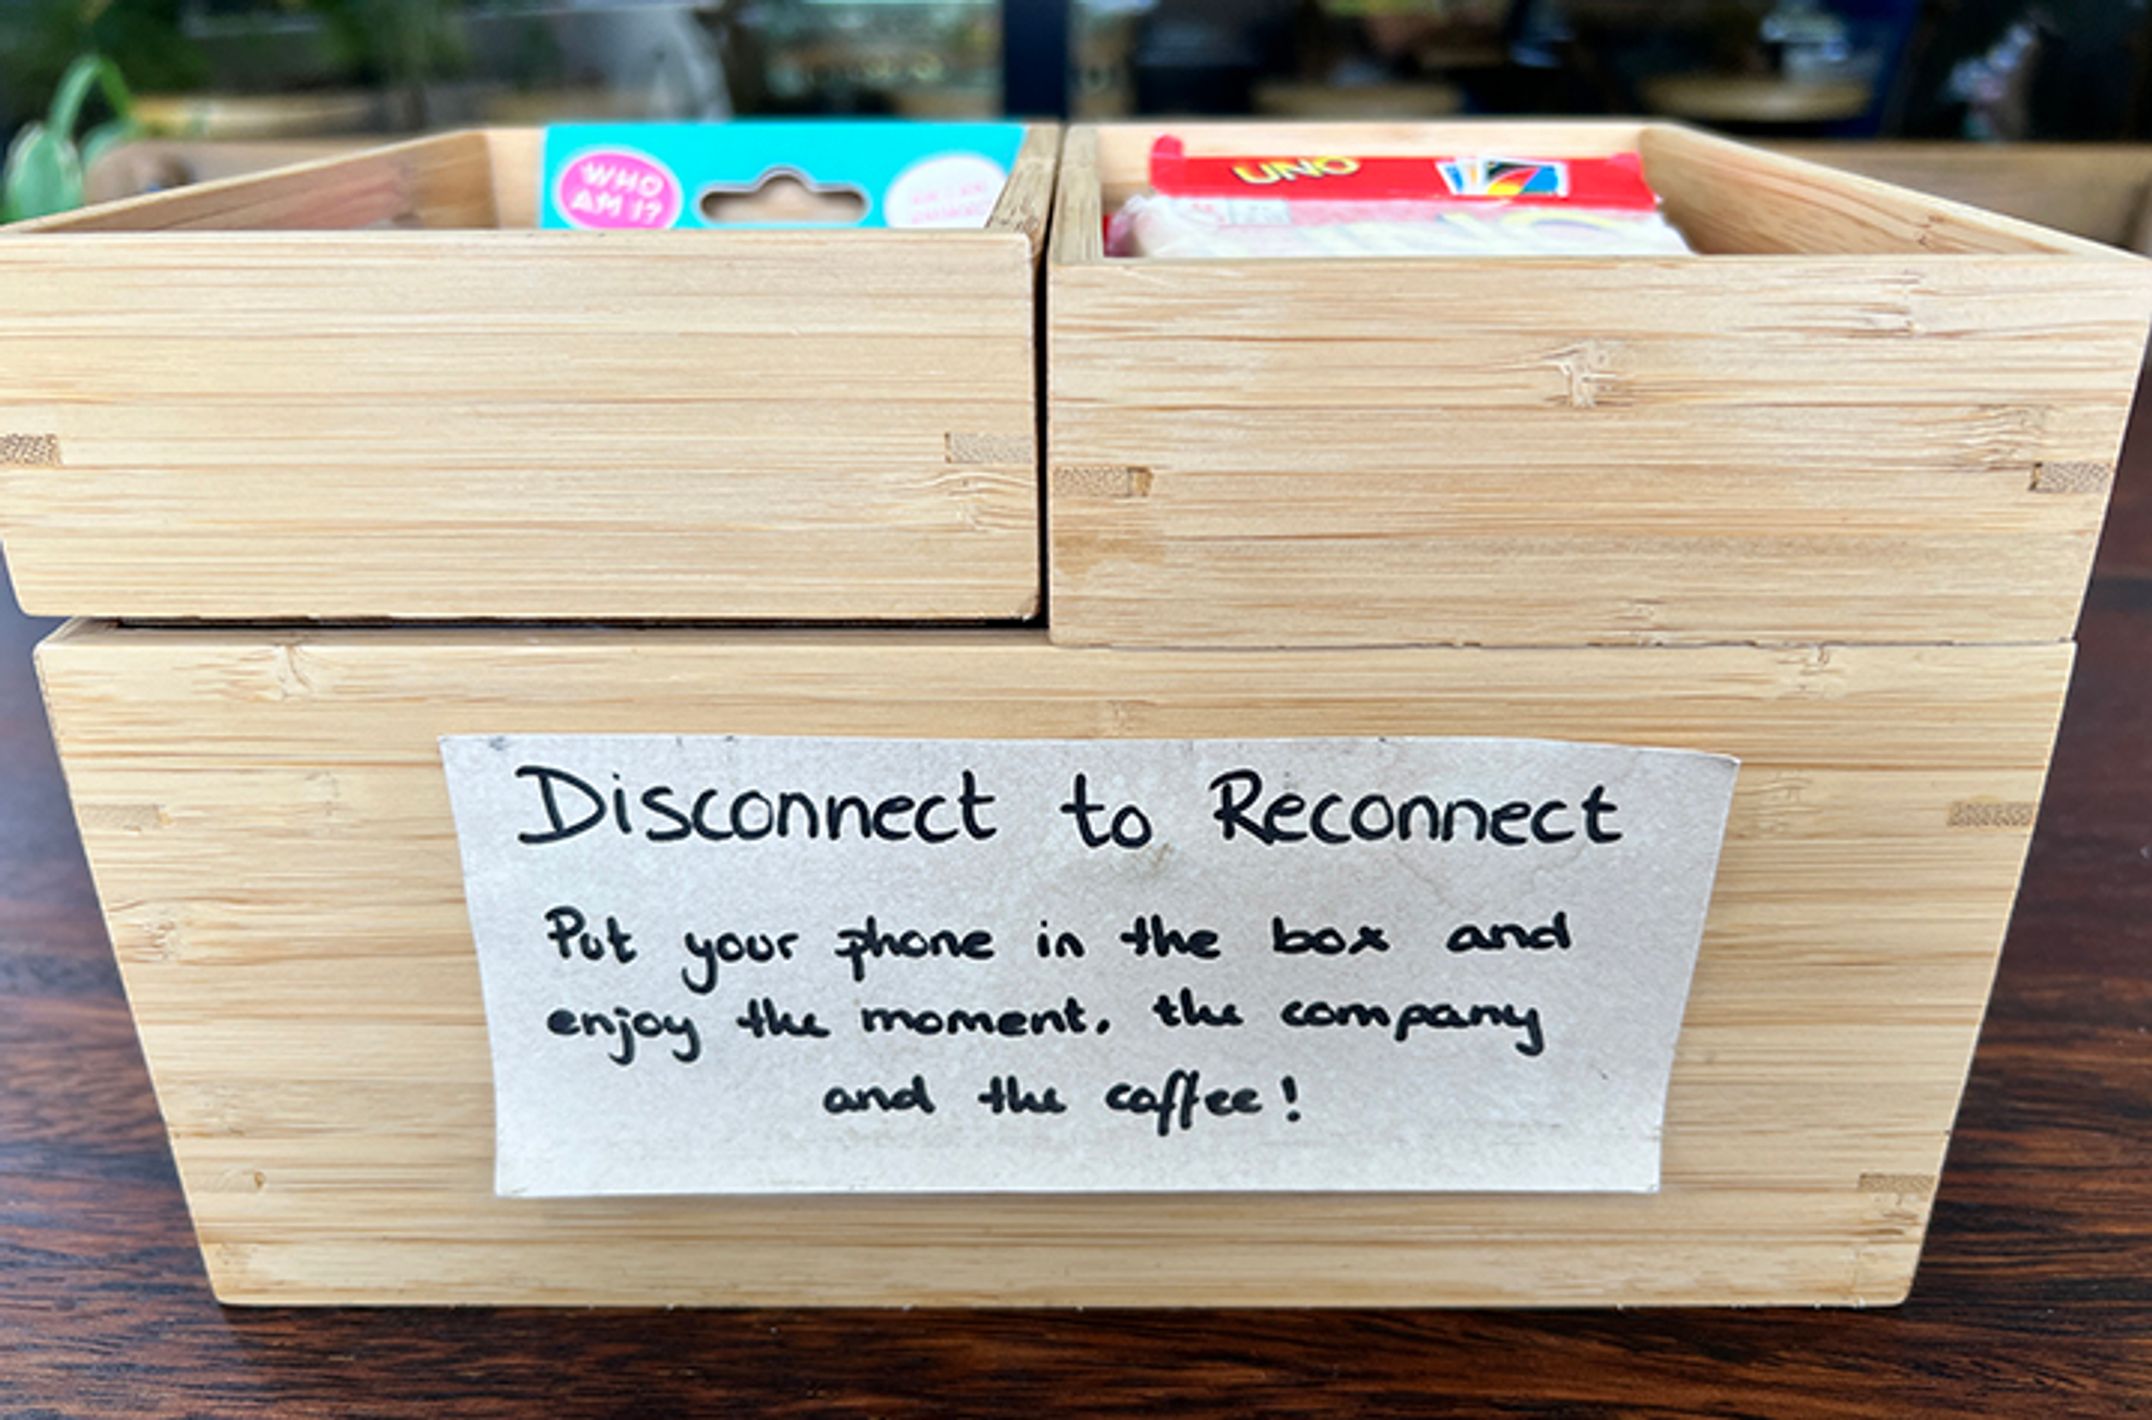 Disconnect to reconnect box for mobile phones at Grounding Cafe